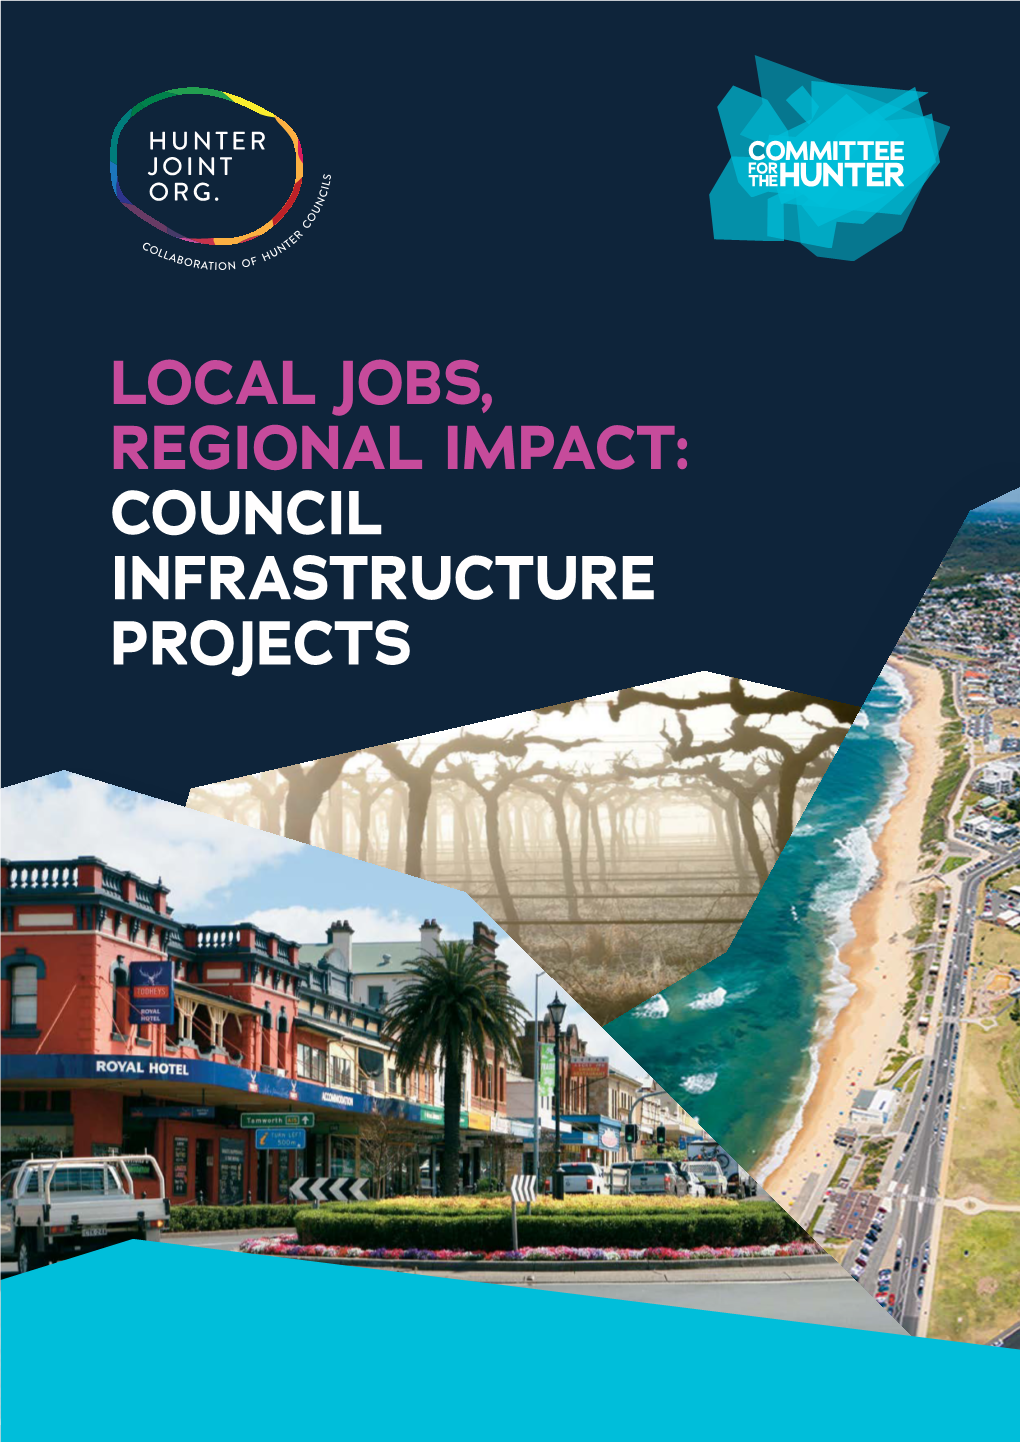 Local Council Infrastructure Projects